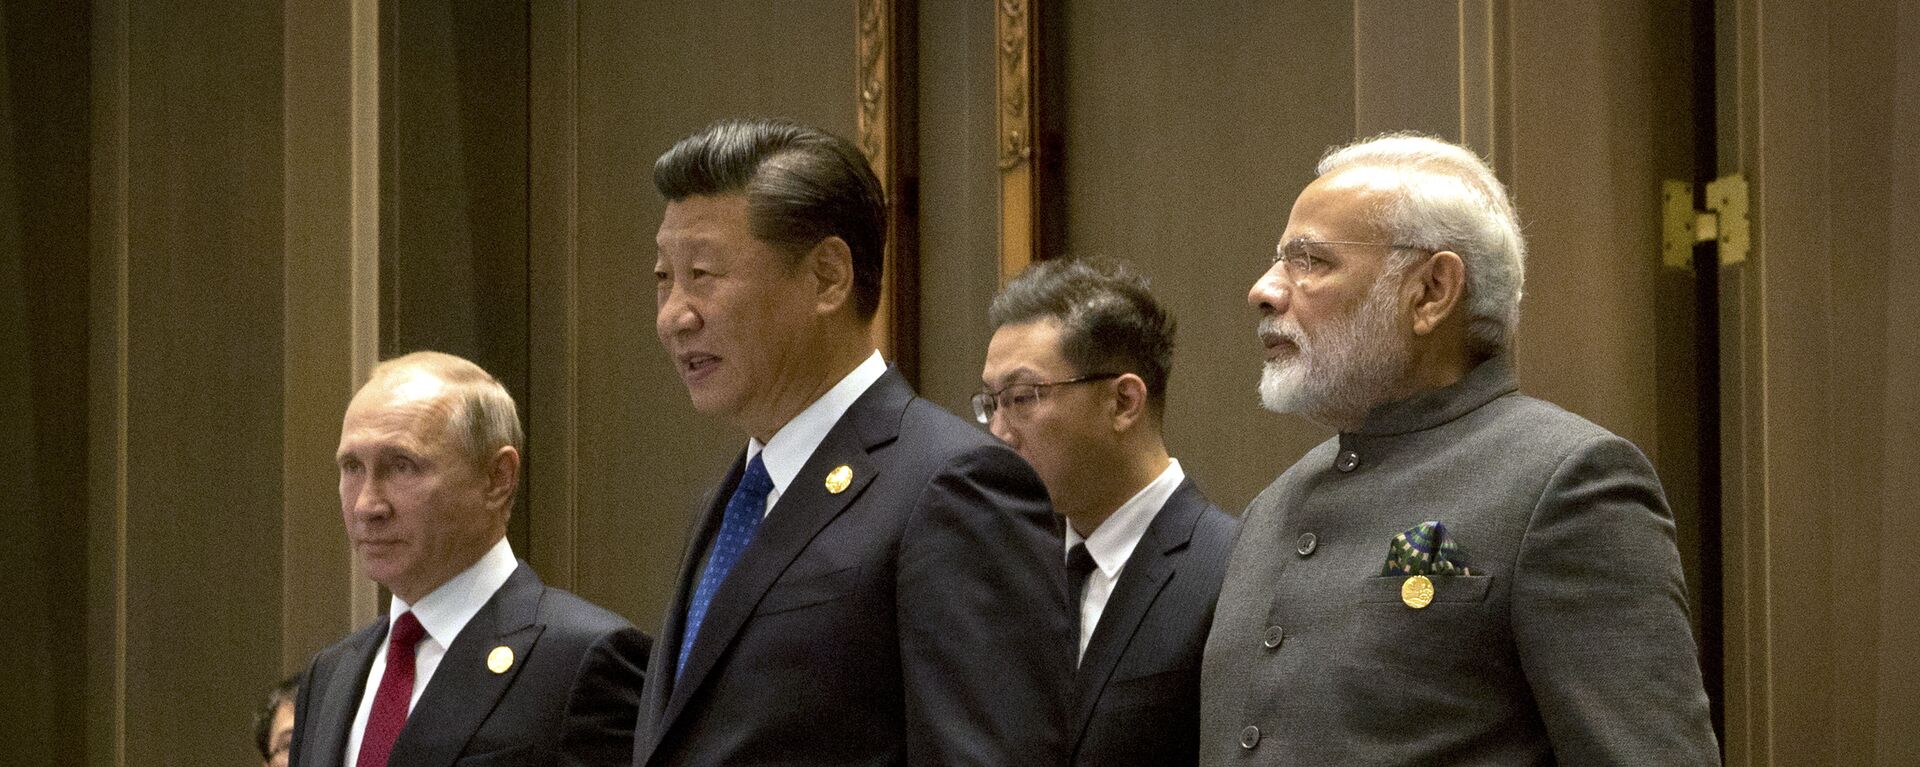 (L to R) Russian President Vladimir Putin, Chinese President Xi Jinping and Indian Prime Minister Narendra Modi arrive for the Dialogue of Emerging Market and Developing Countries on the sidelines of the 2017 BRICS Summit in Xiamen, southeastern China's Fujian Province on September 5, 2017 - Sputnik International, 1920, 09.09.2021